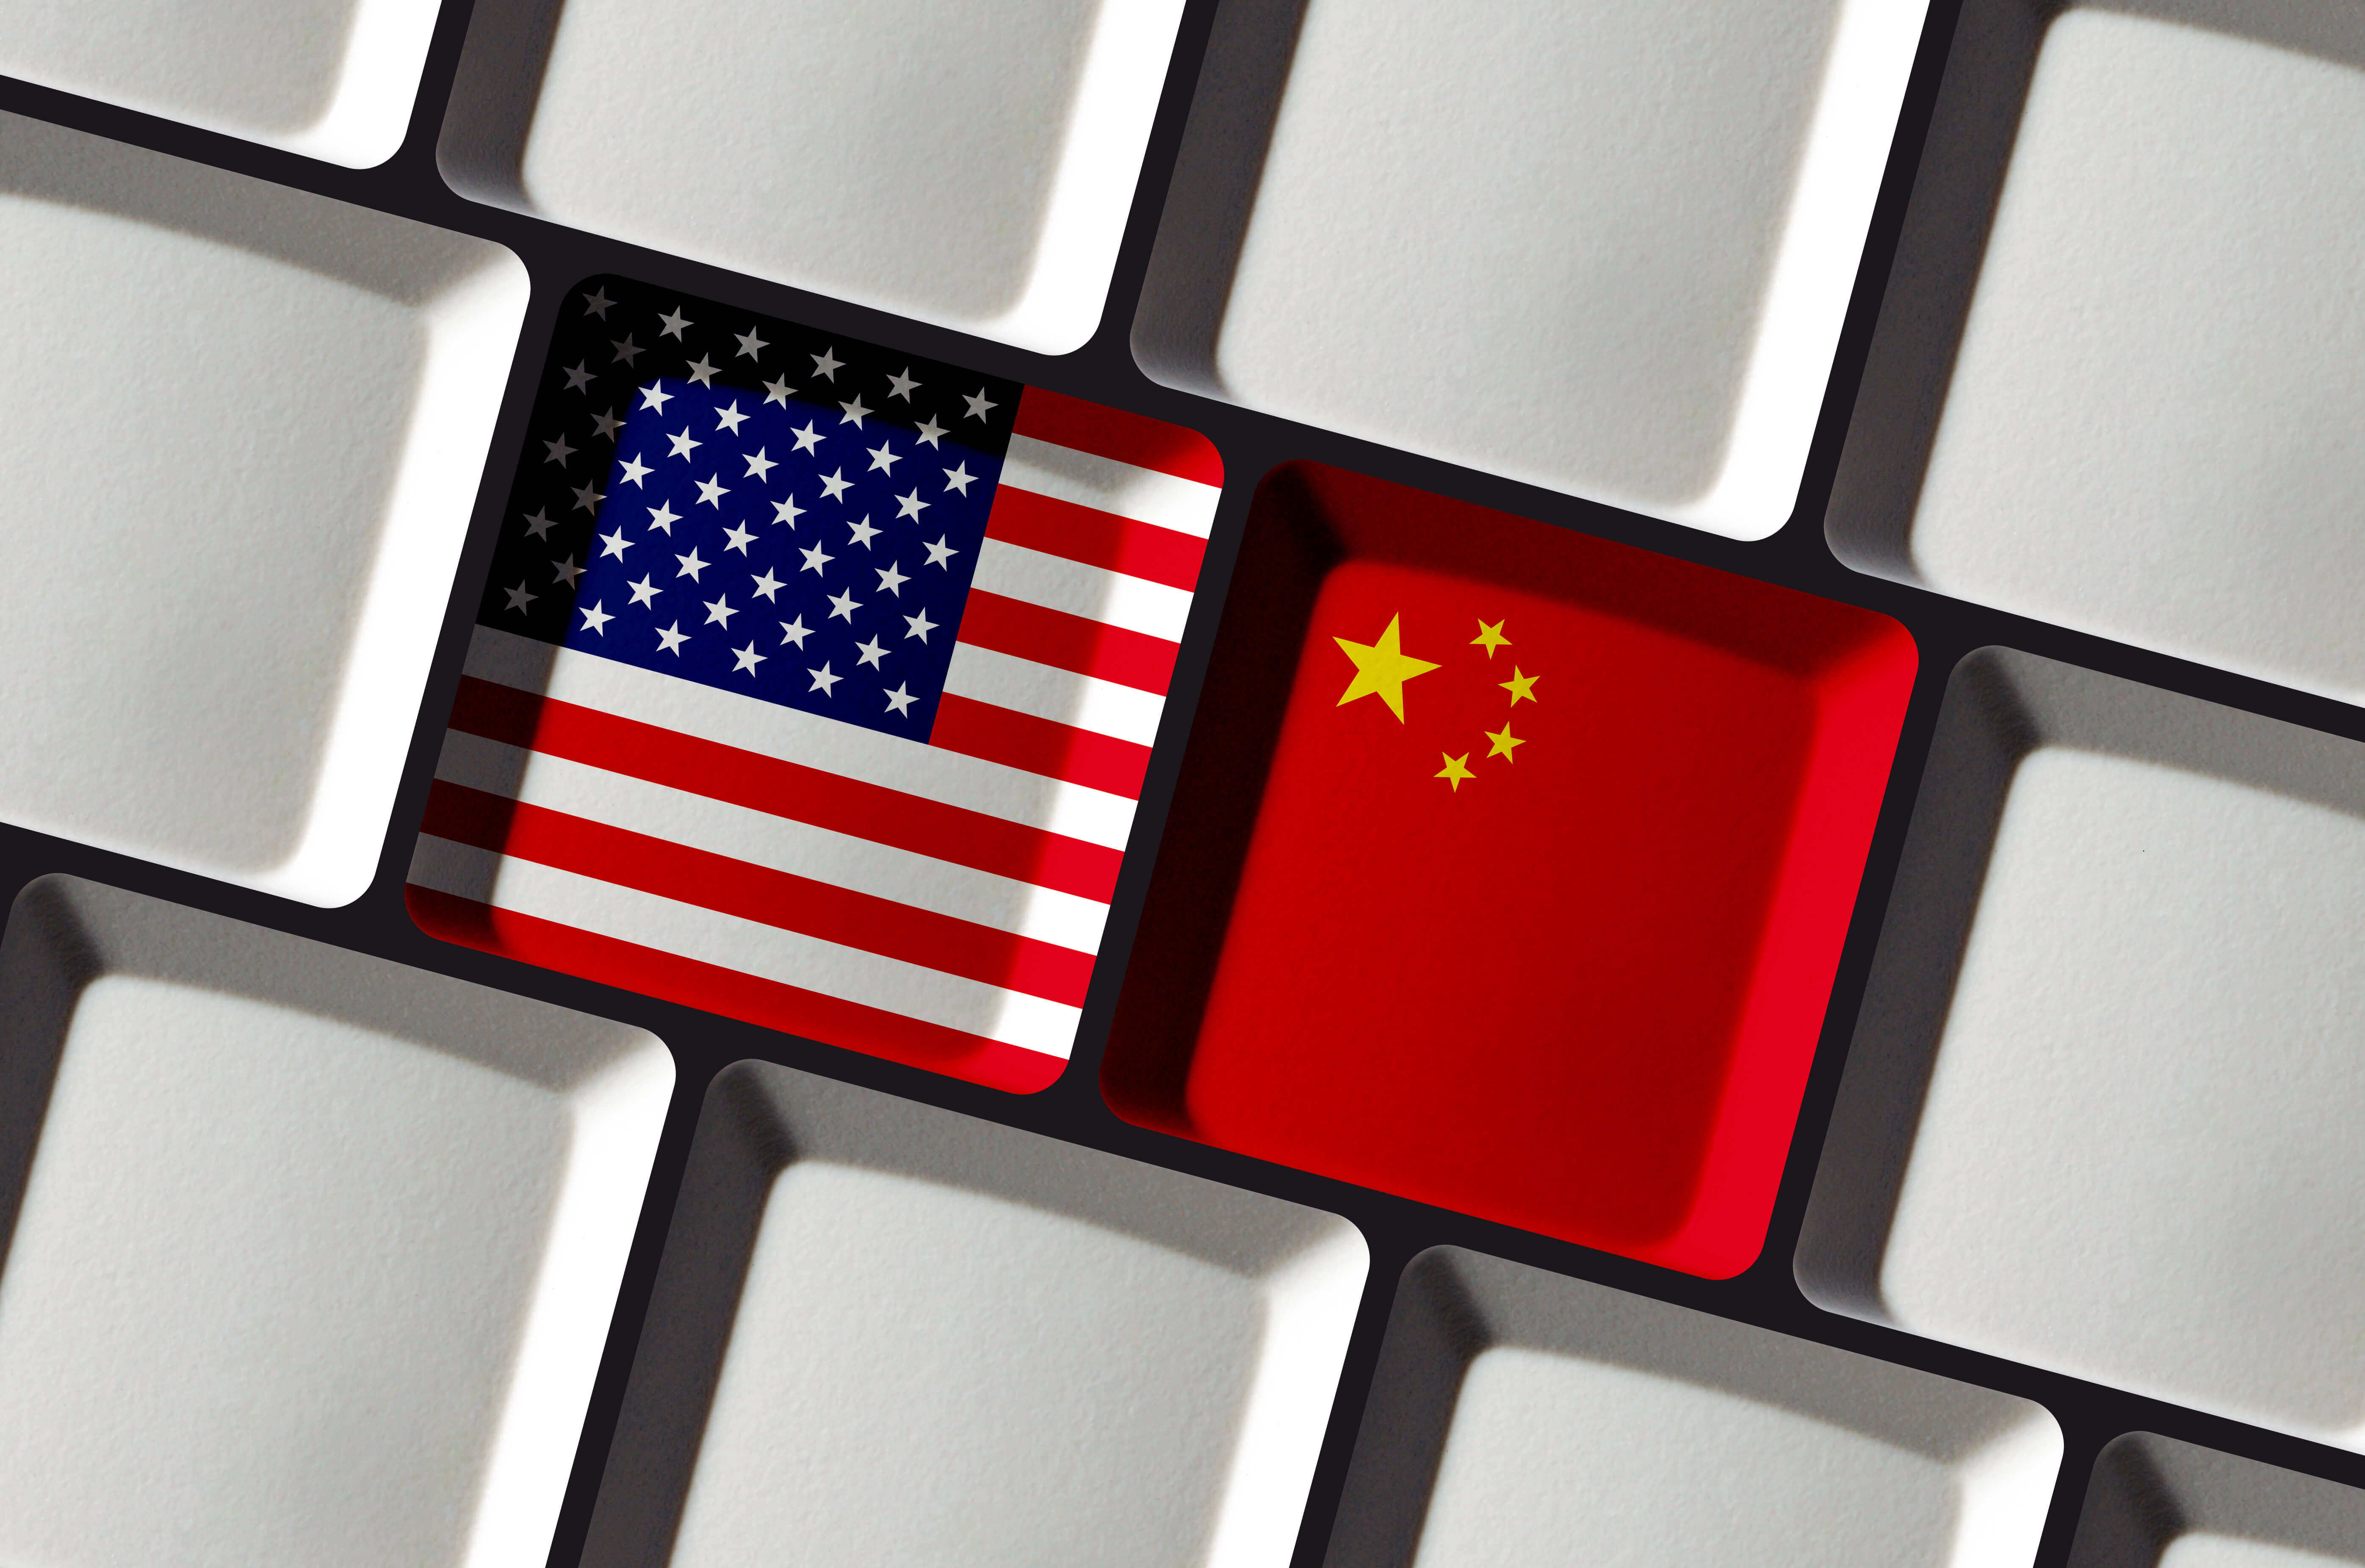 U.S. and China Race  for Control of Future Global Technology